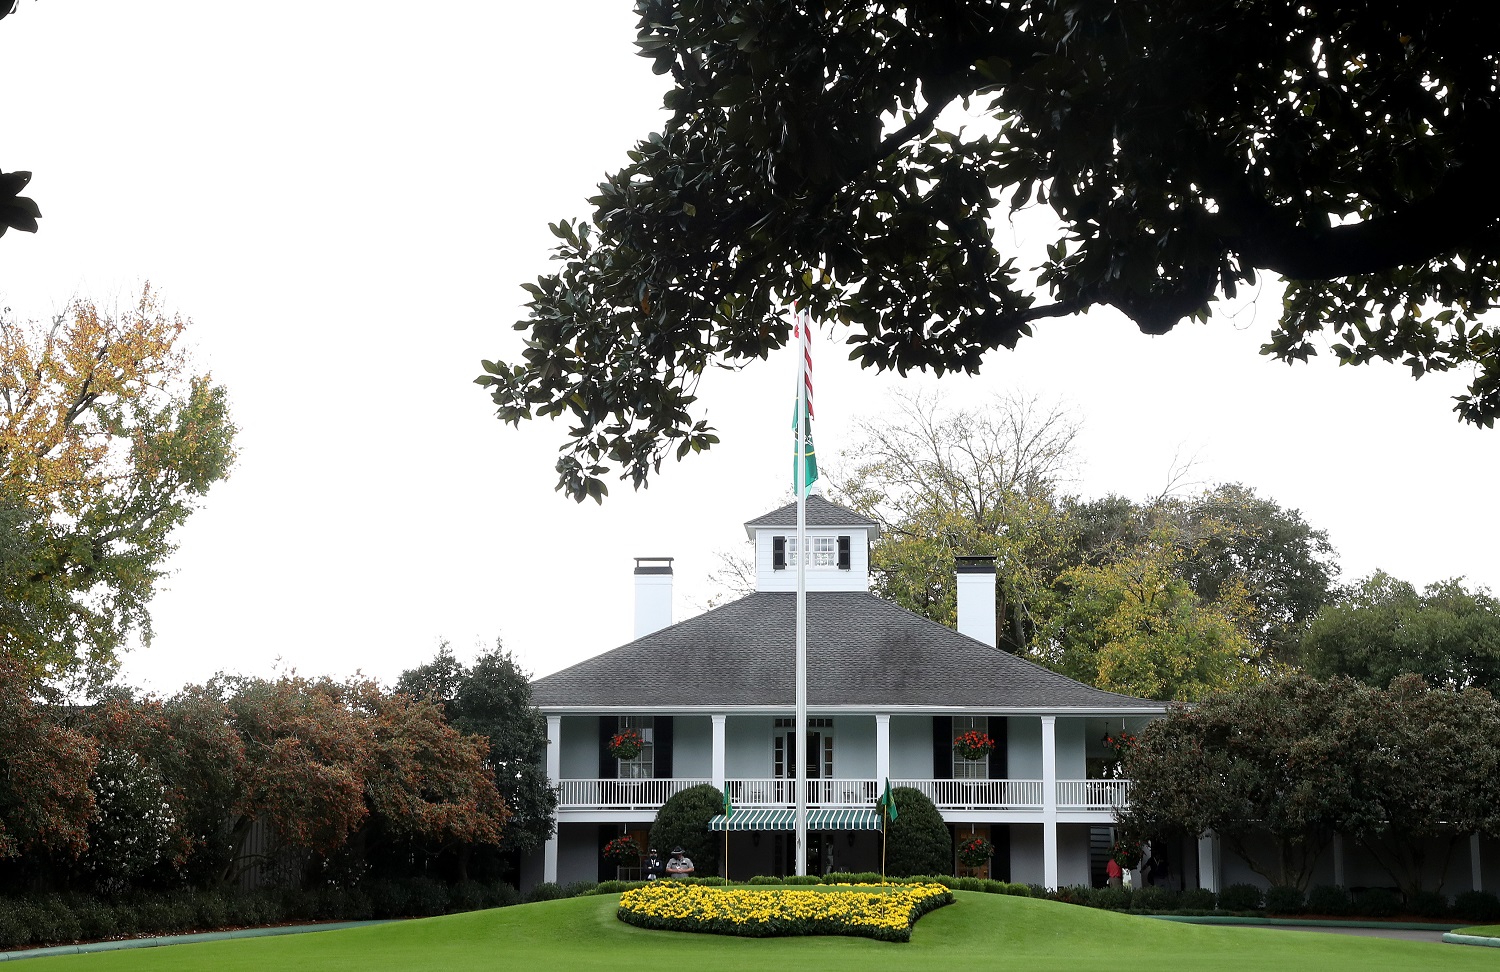 Round 1 of The Masters begins Thursday at 8 a.m.